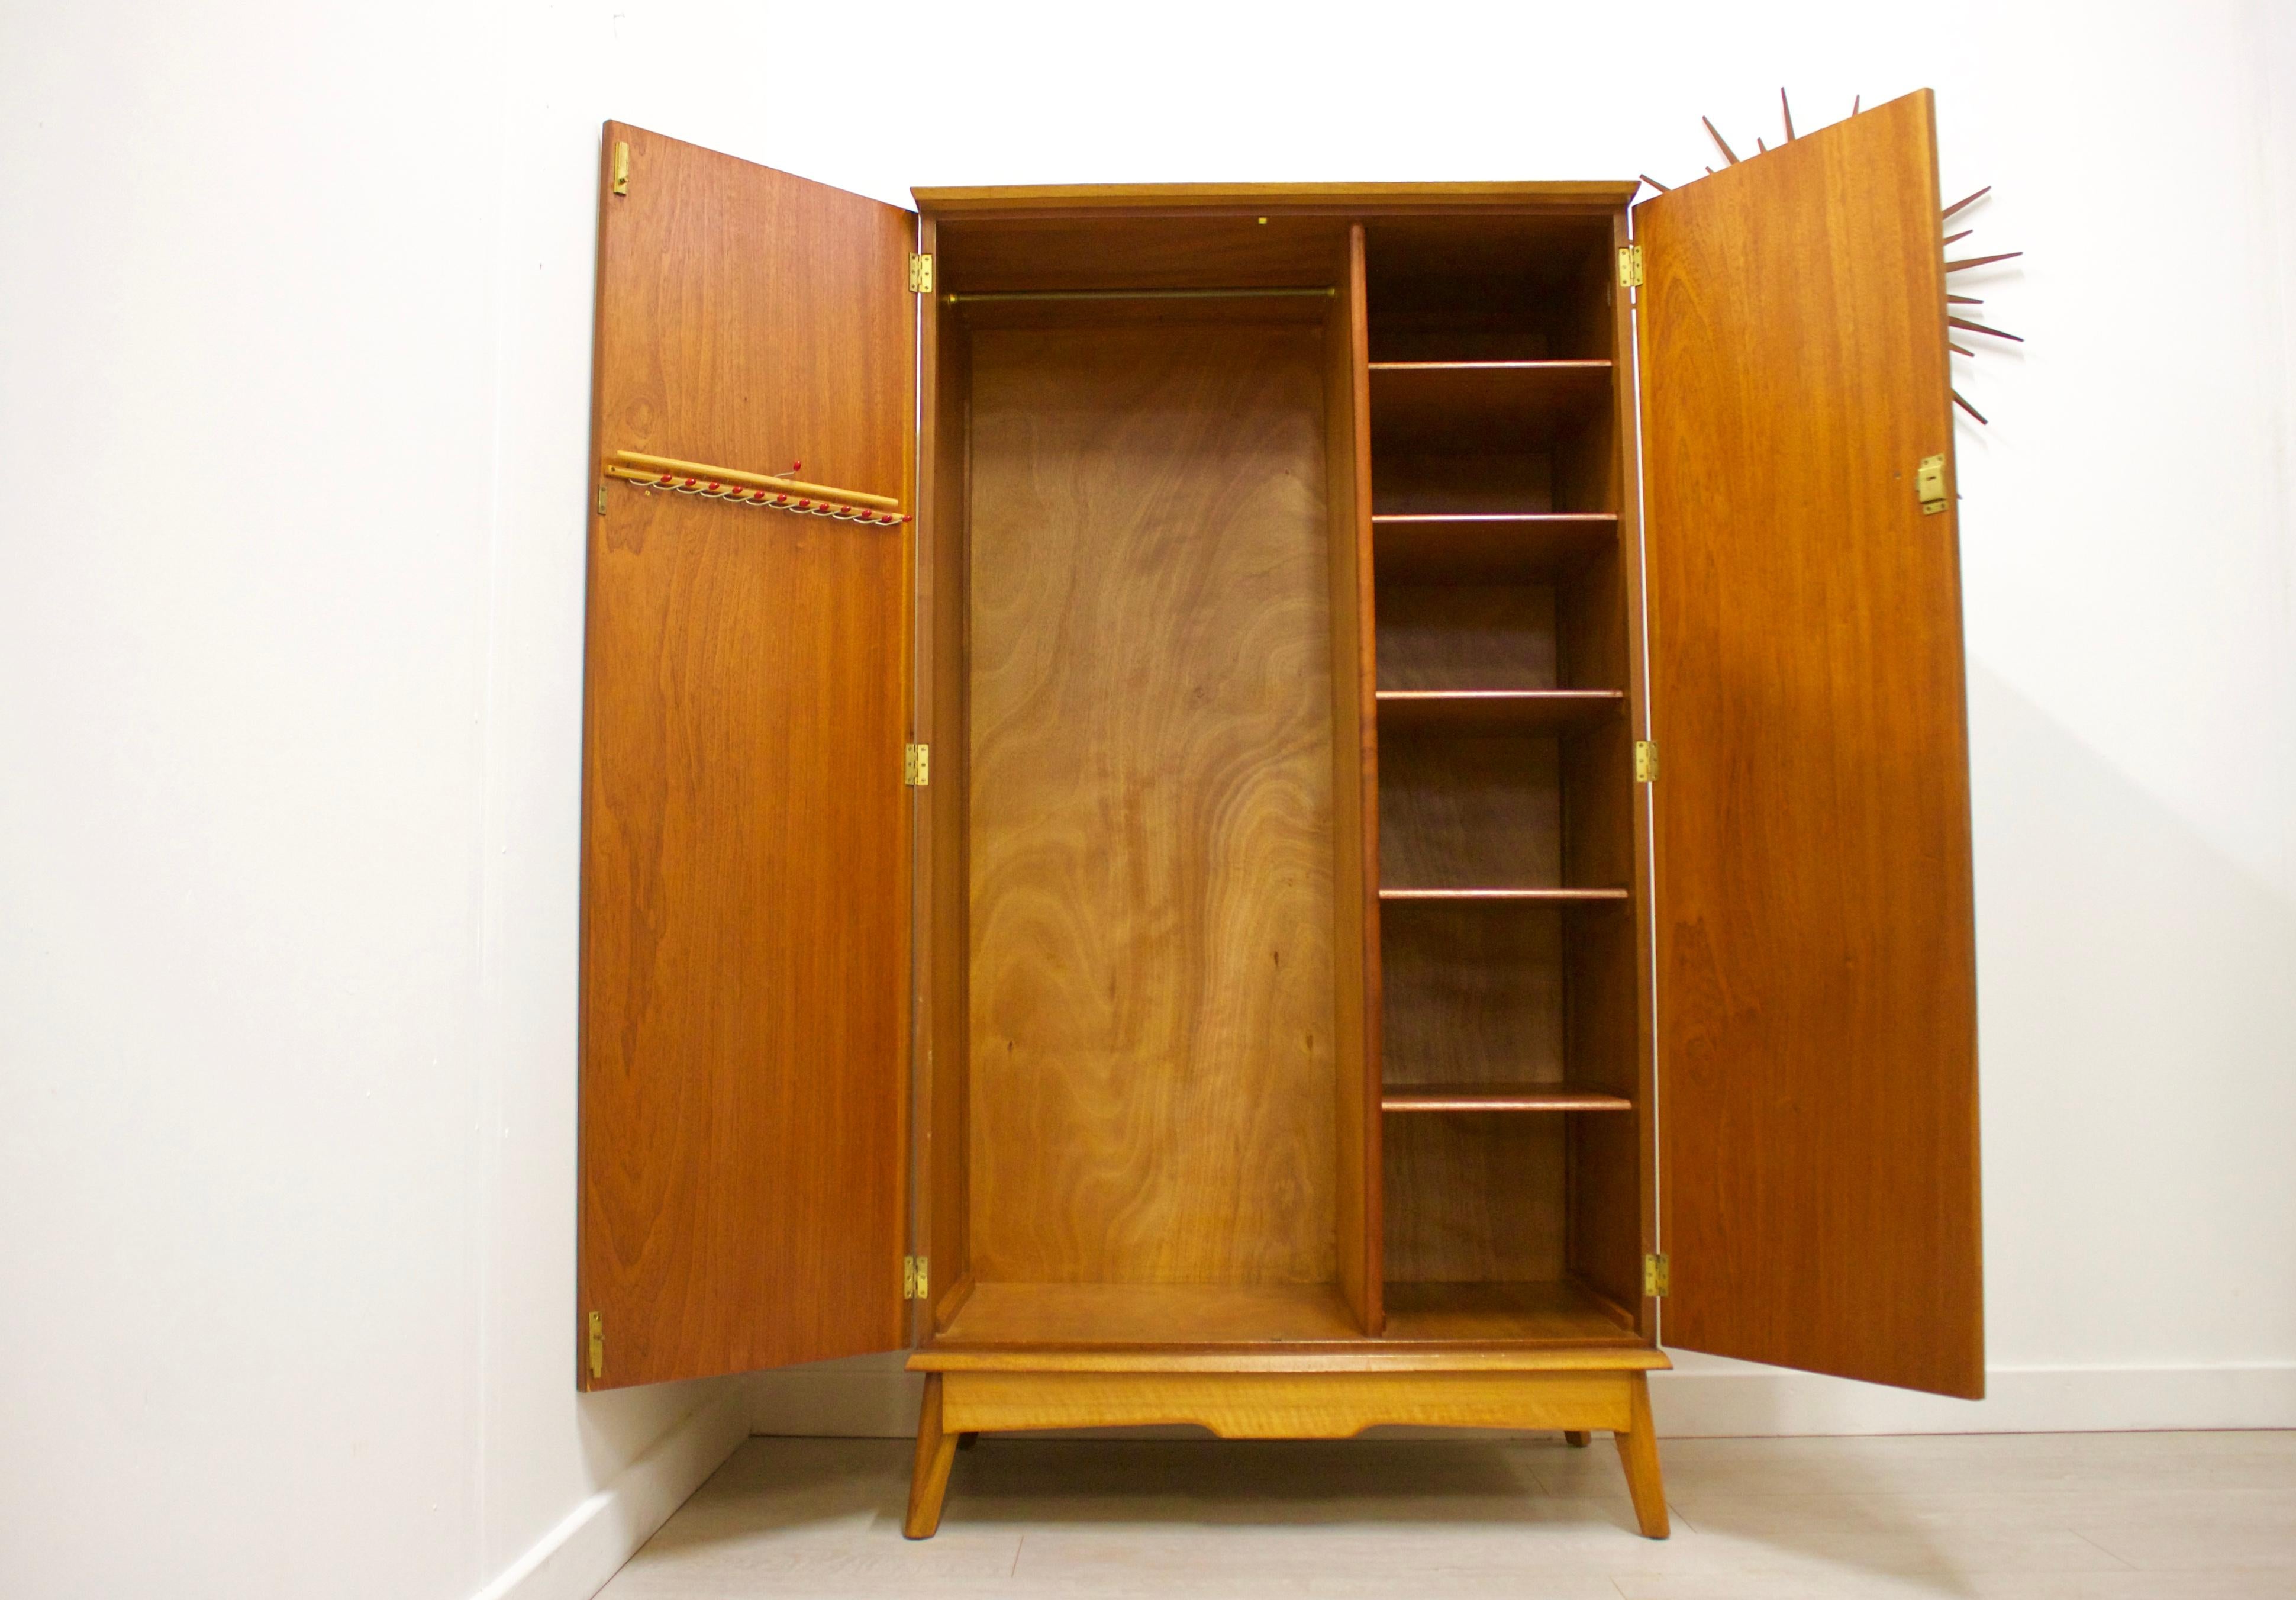 - Mid-Century Modern wardrobe
- Manufactured by Alfred Cox
- Made from walnut & walnut Veneer
- Featuring a hanging rail to the left, shelves to the right, and a tie rack on the left door.